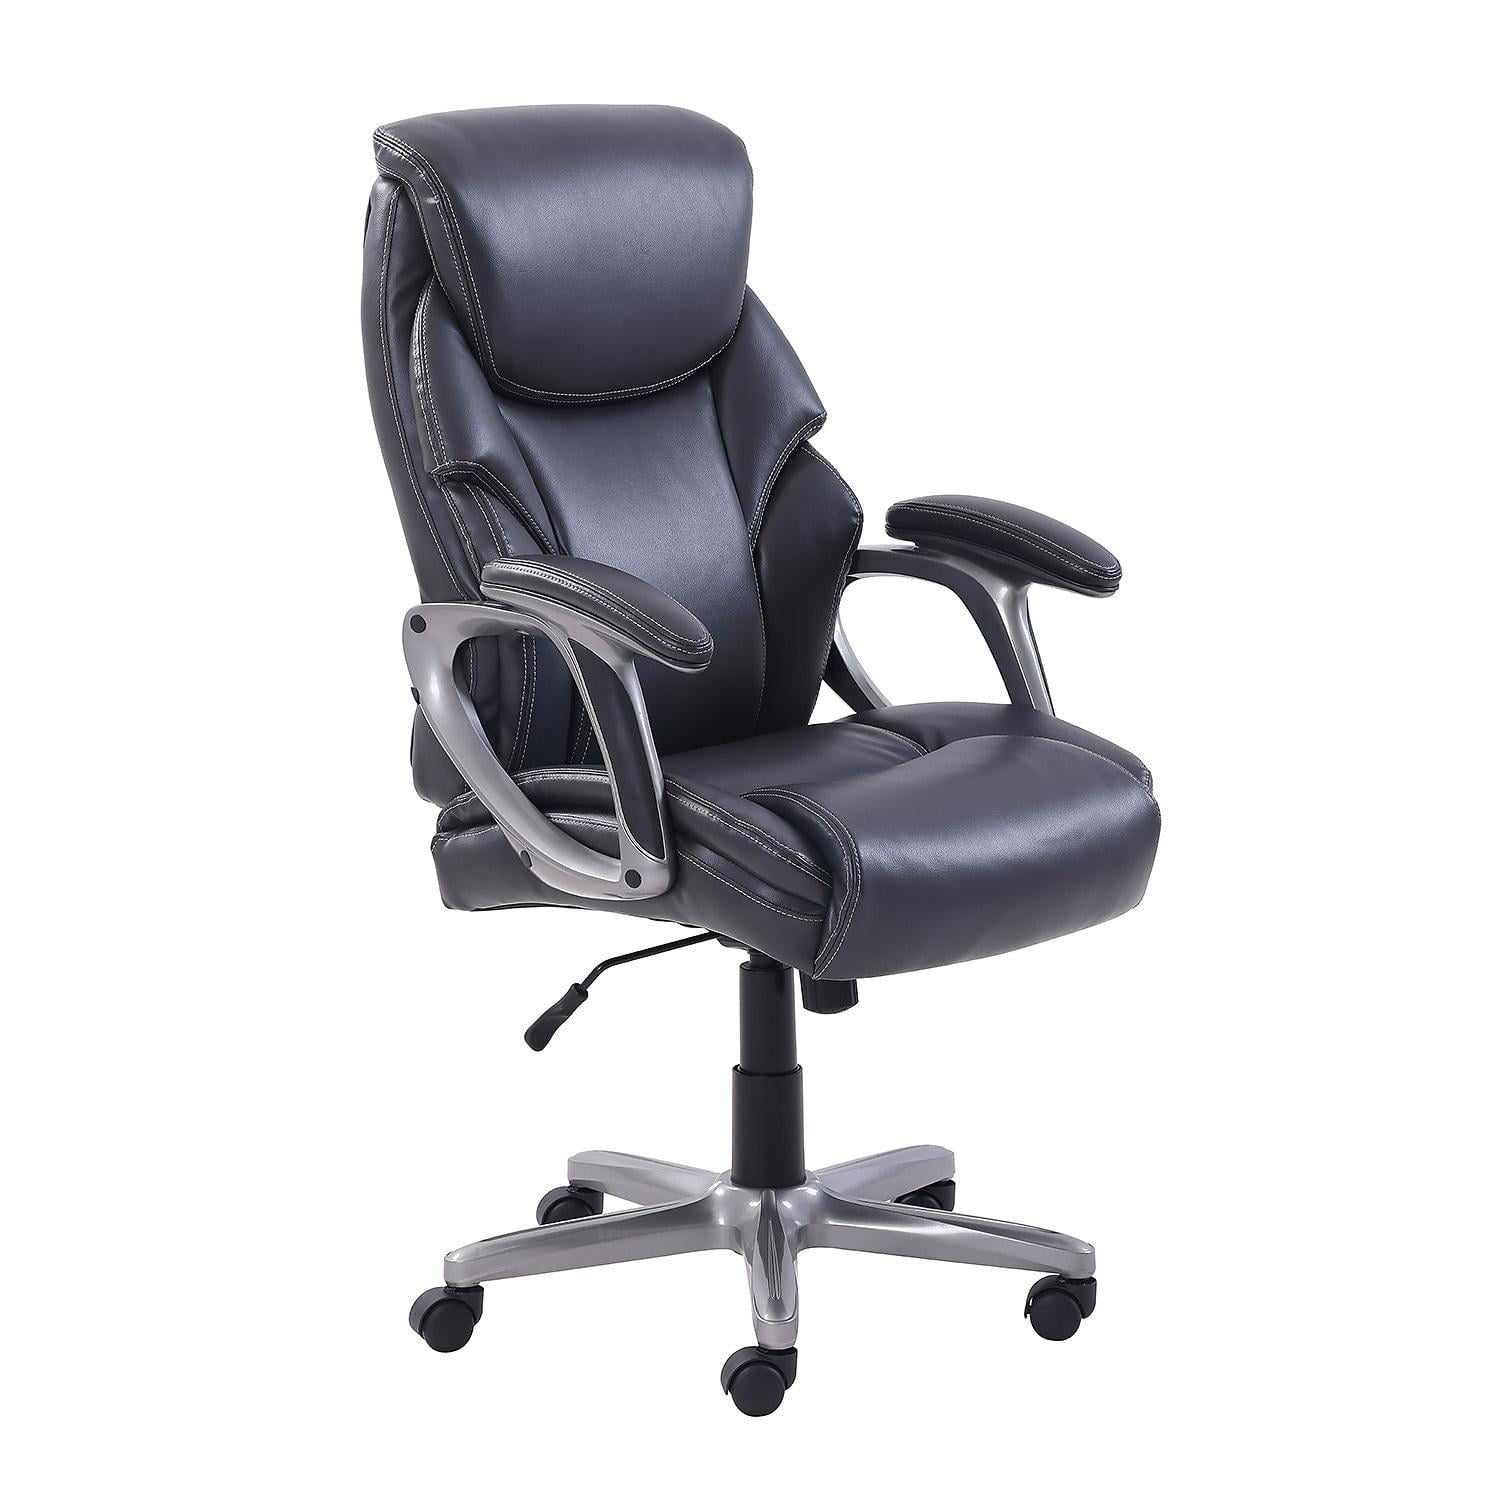 Serta Manager's Office Chair, Supports up to 250 lbs.(Assorted Colors